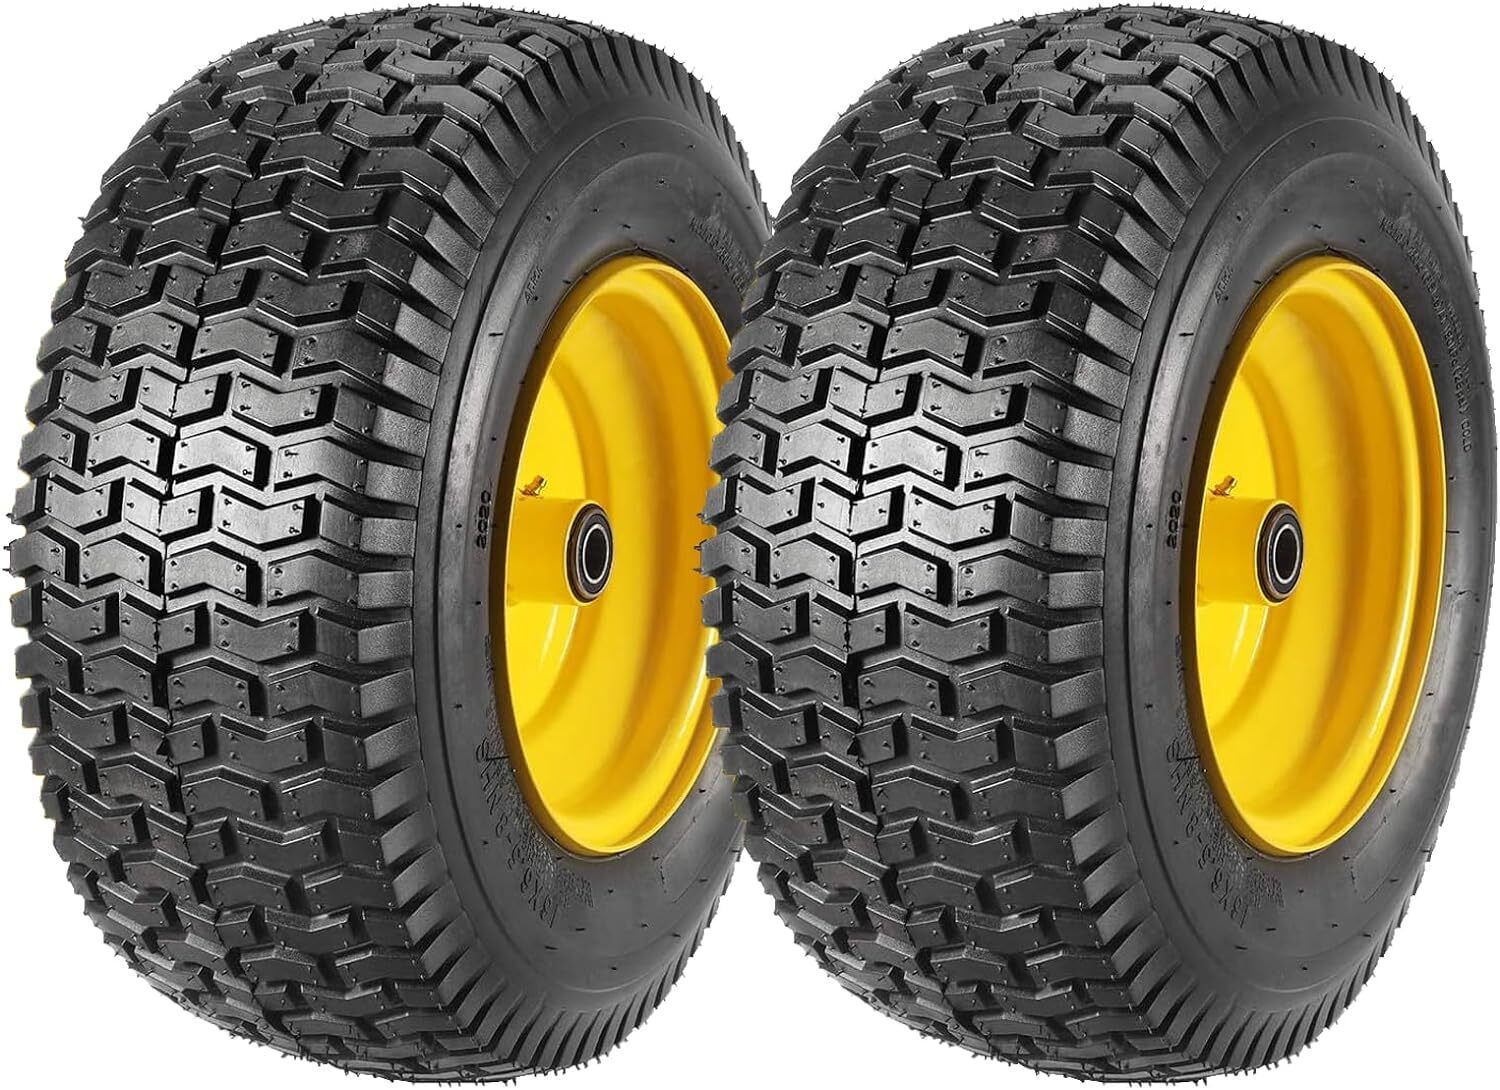 (Set of 2) 18x8.50-8 Tires & Wheels 4 Ply for Lawn & Garden Mower Turf Tires US